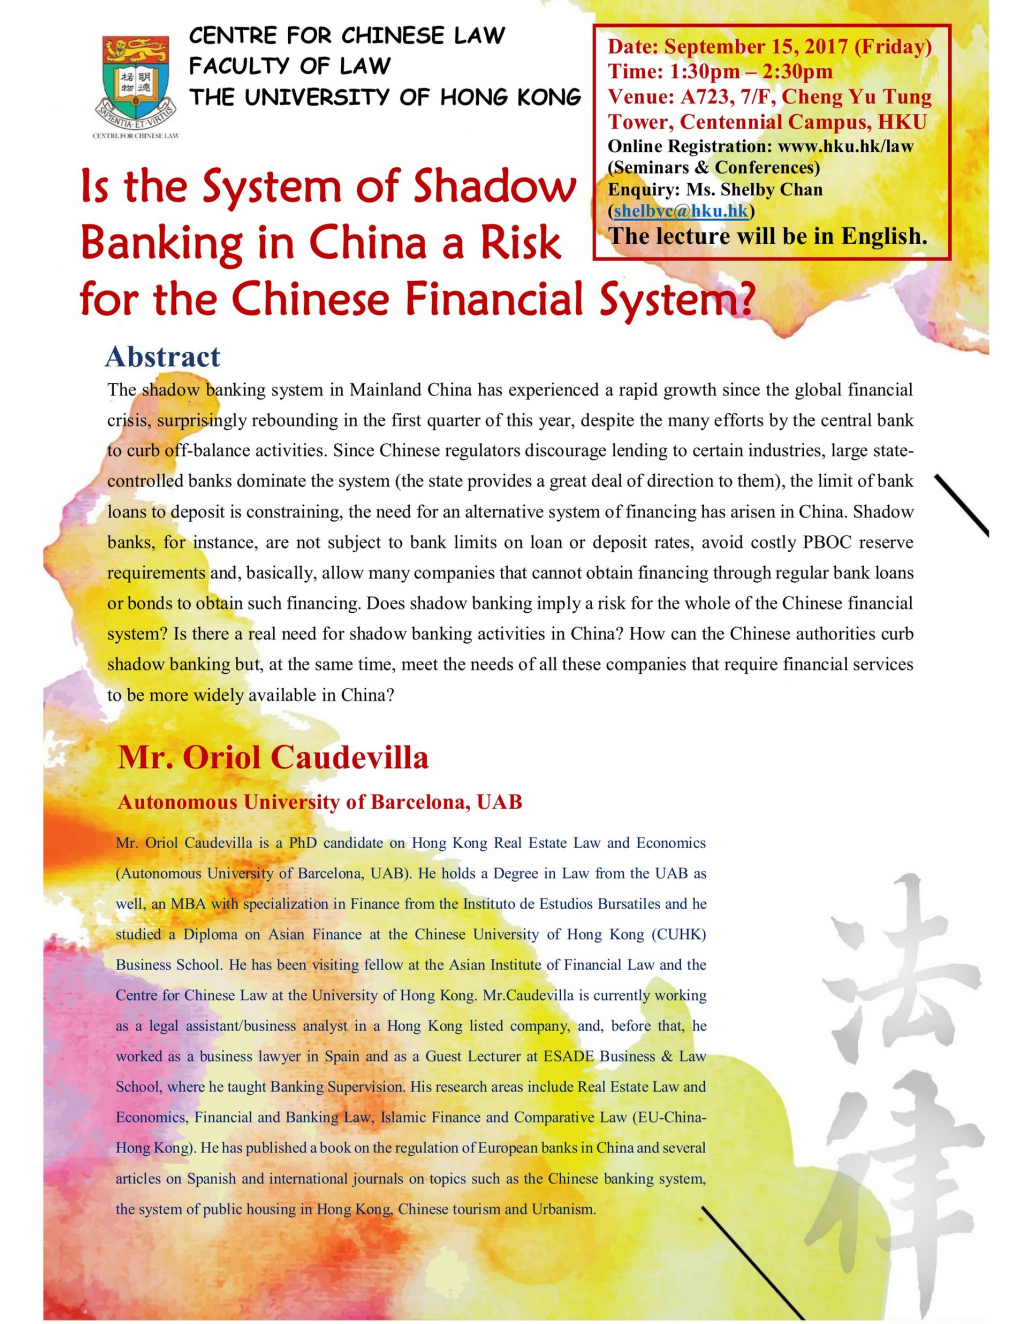 Is the System of Shadow Banking in China a Risk for the Chinese Financial System?